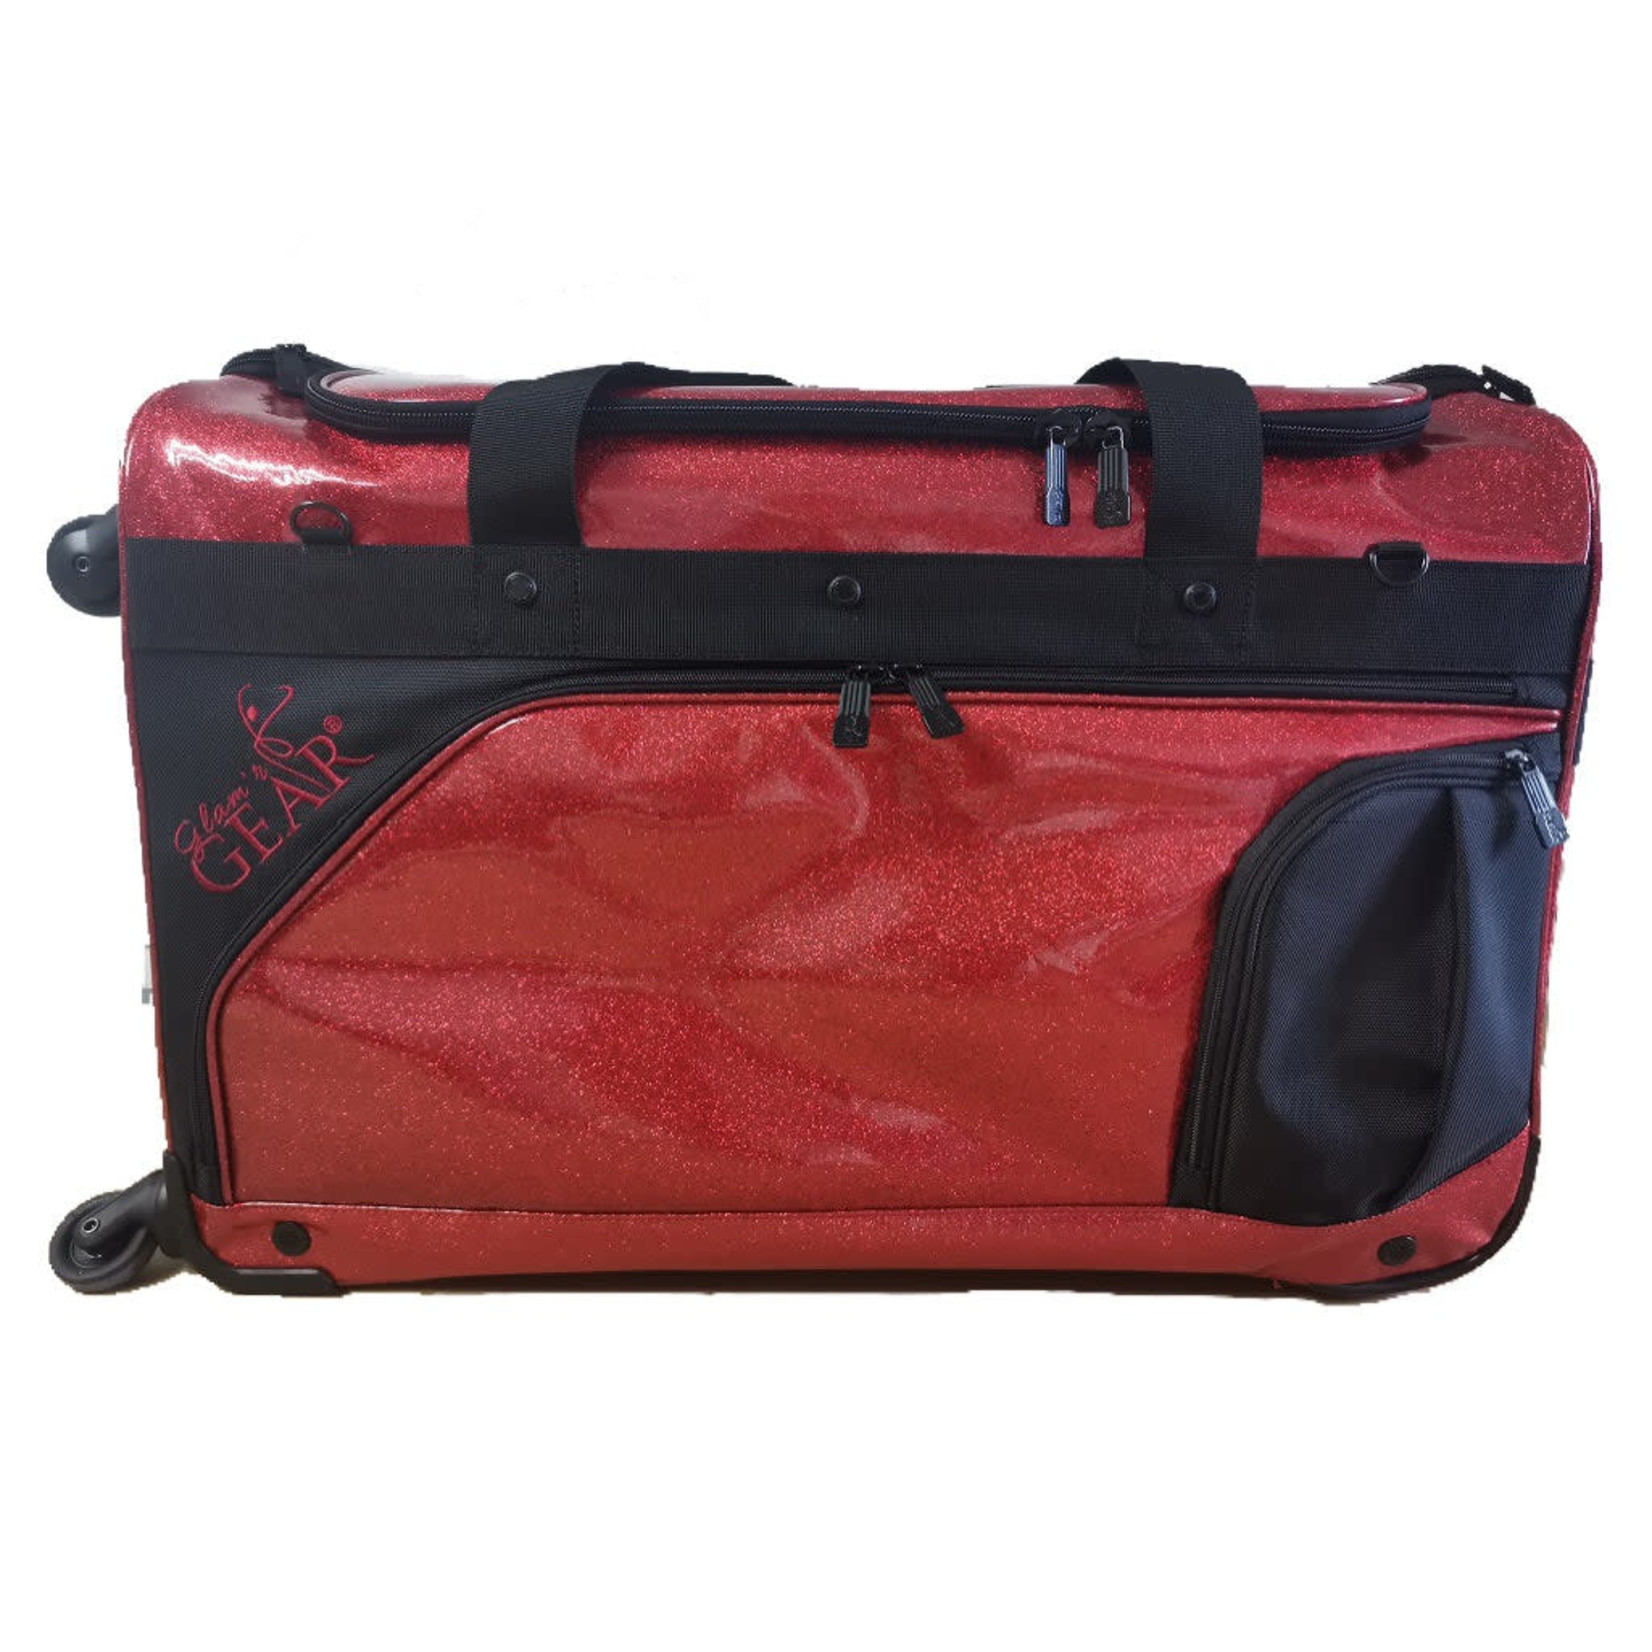 Glam'r Gear Glam'r Gear Mobile Changing Station Duffle Bag With Rack STANDARD